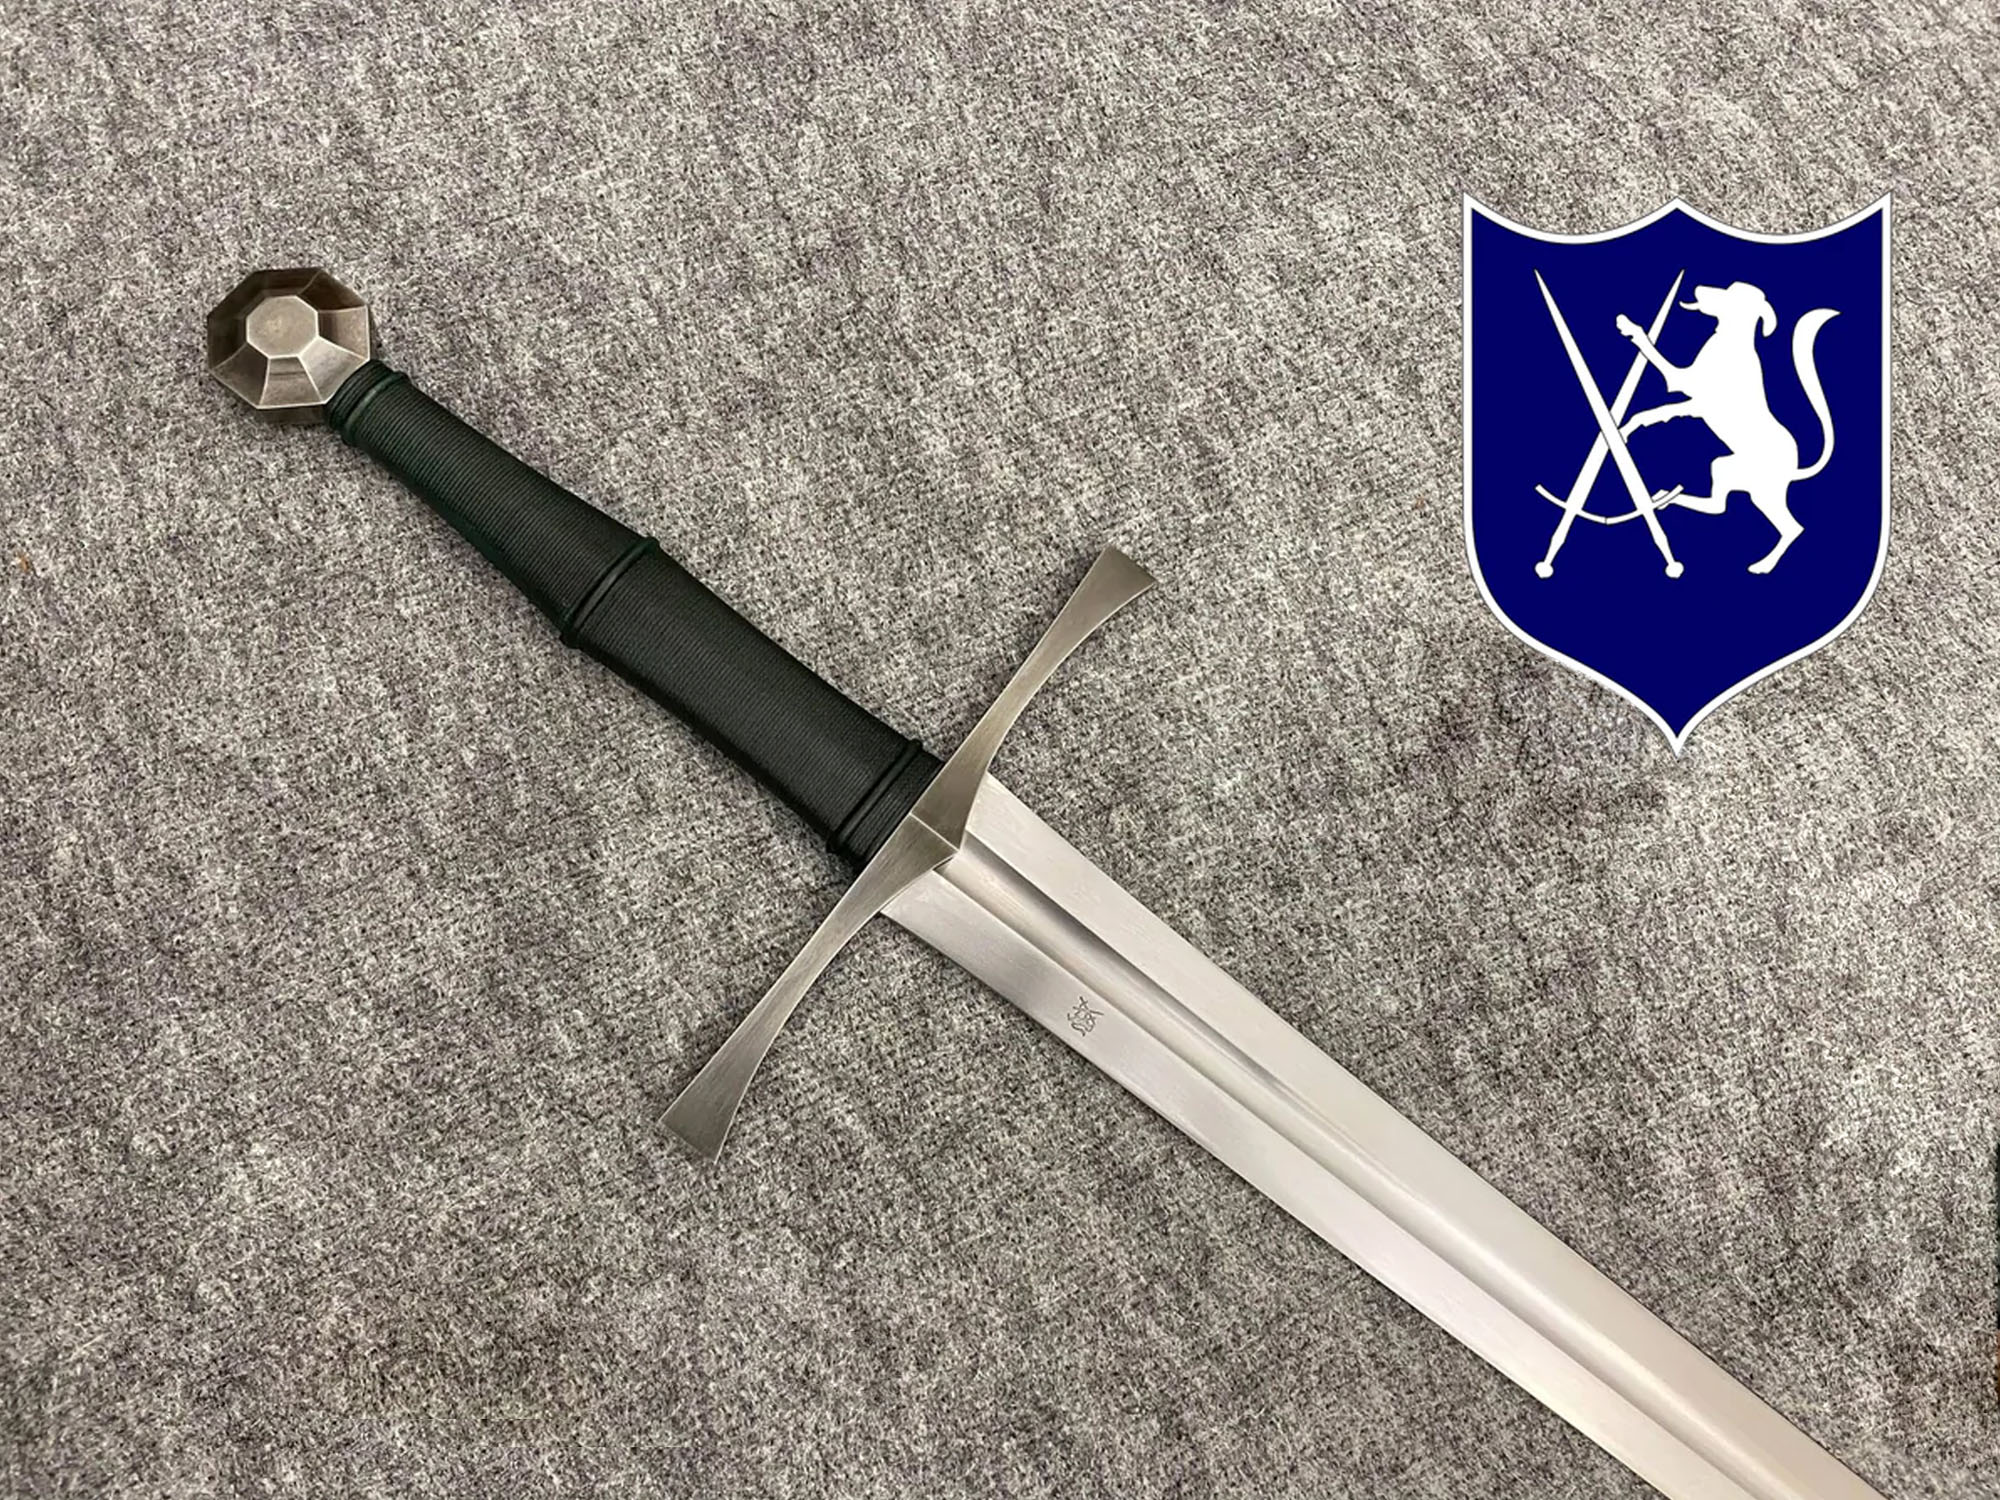 The Exeter Sword, handforged and sharp blade